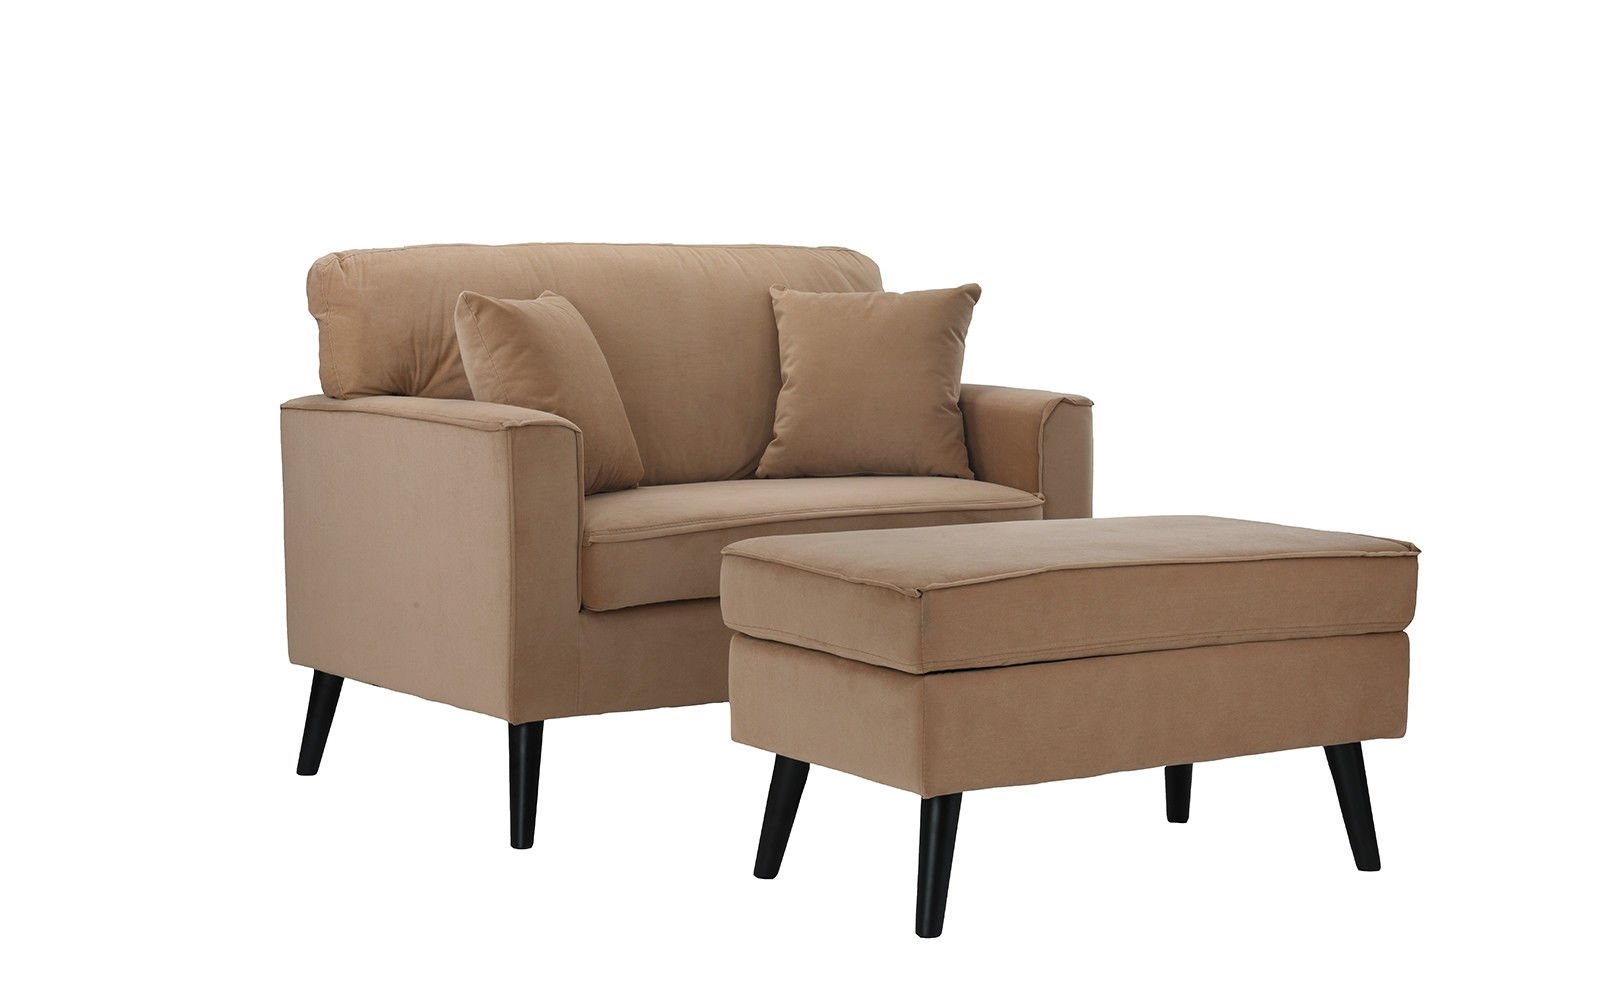 Living Room Accent Chair And Ottoman